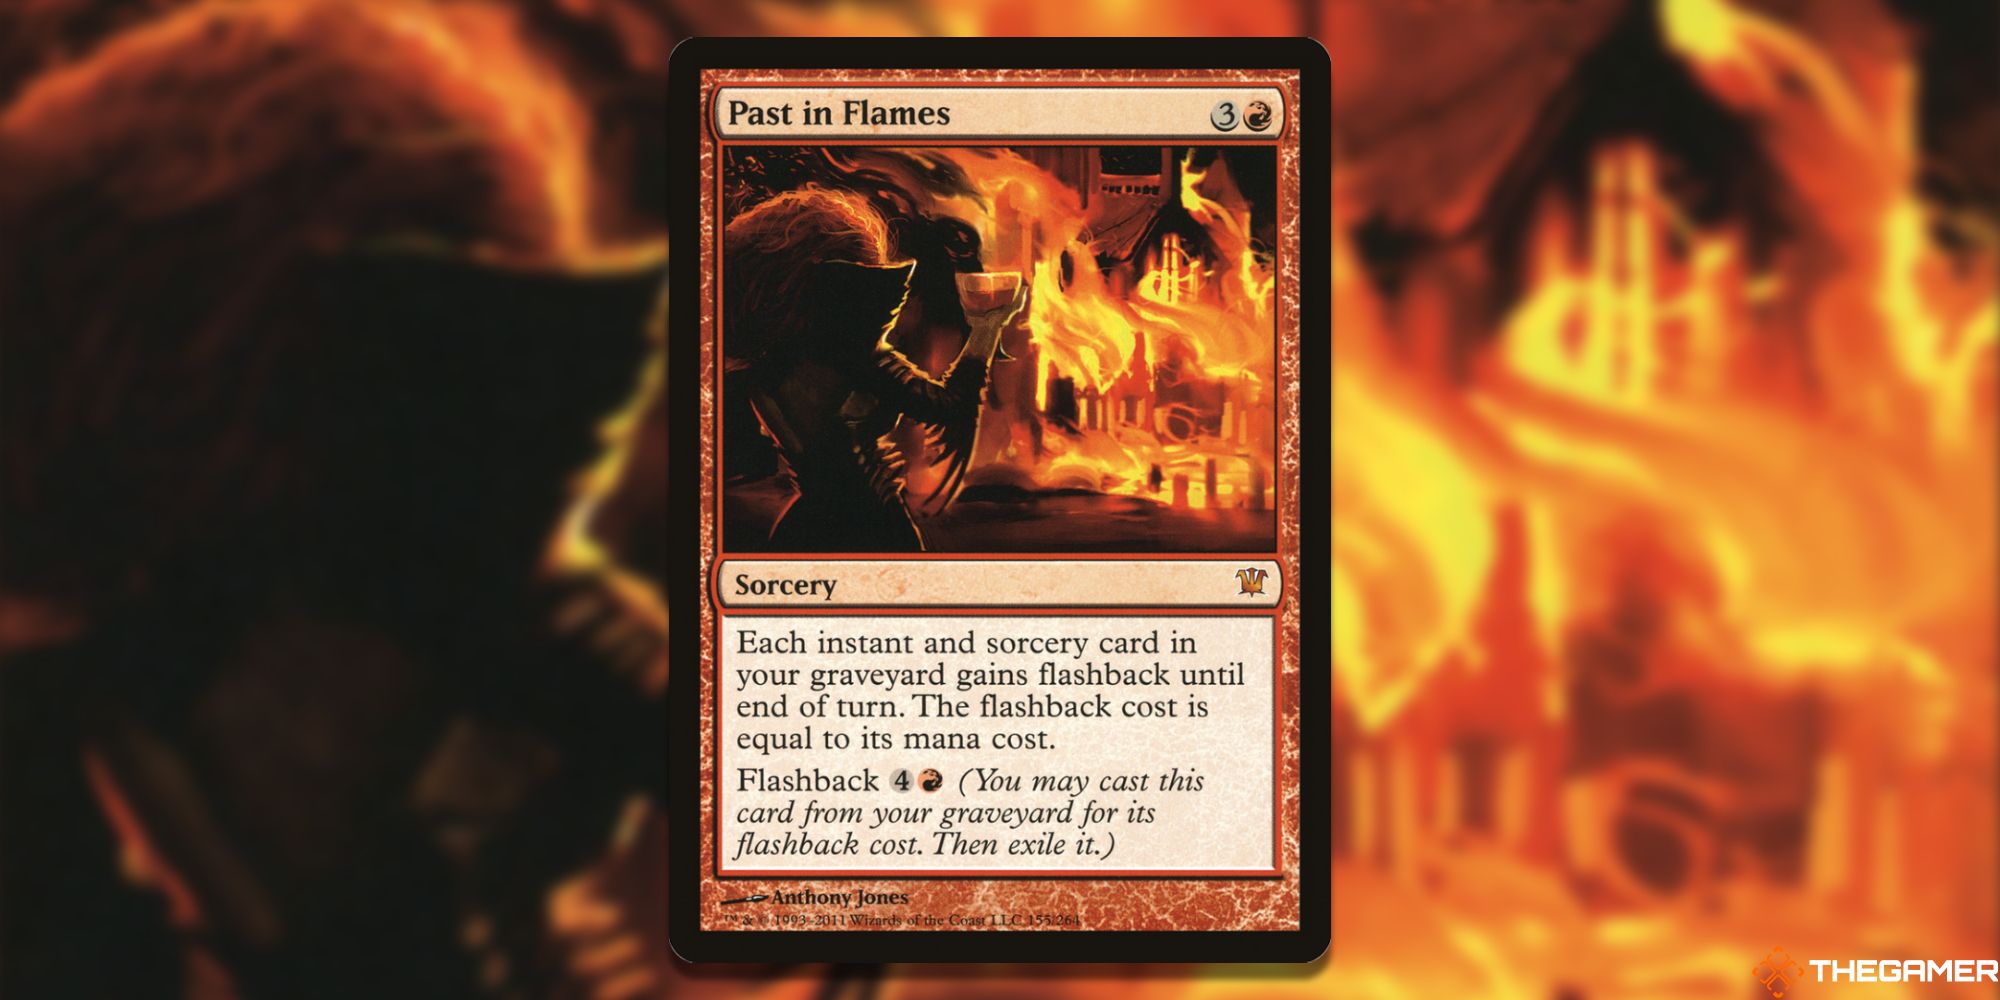 Image of the Past in Flames card in Magic: The Gathering, with art by Anthony Jones